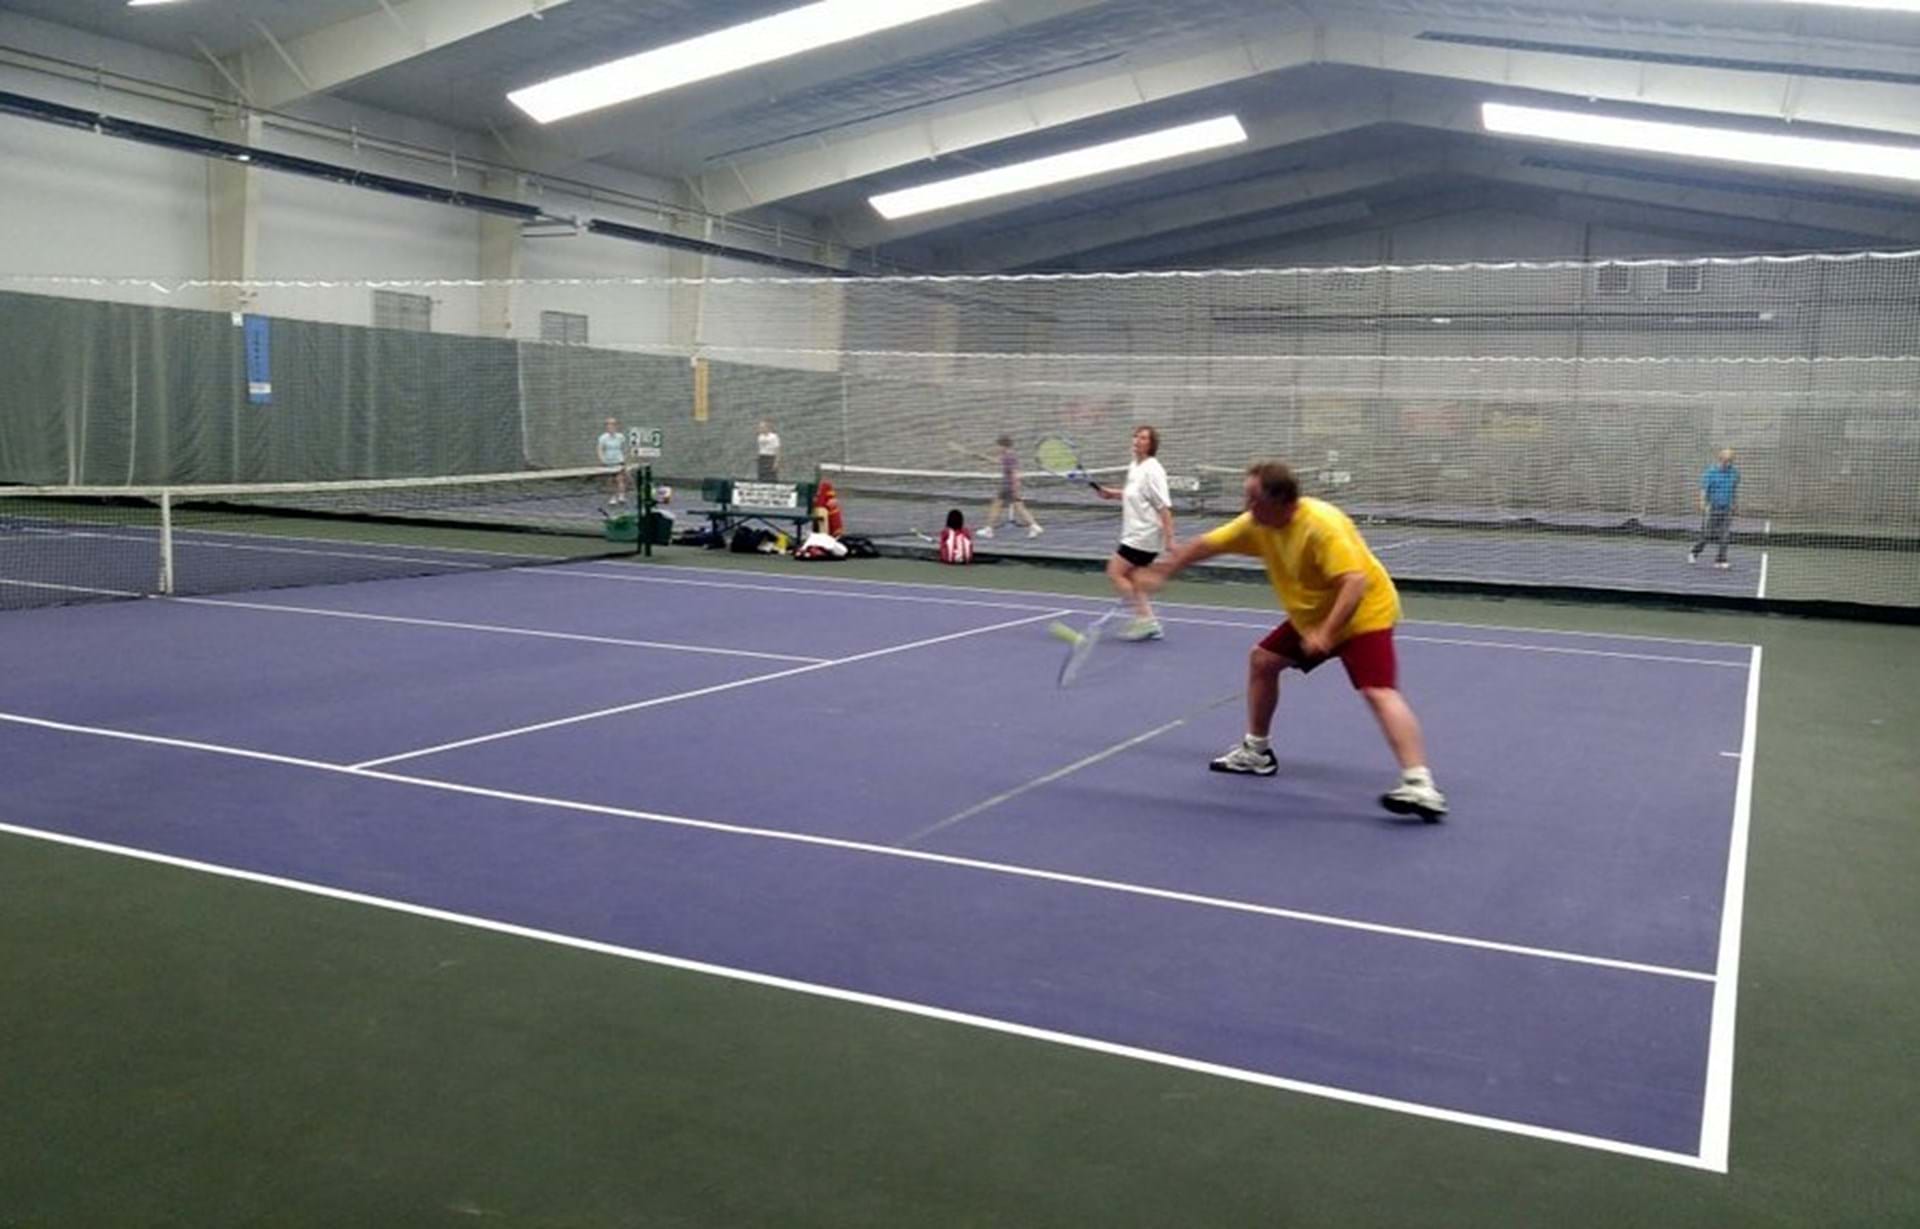 Saturday morning tennis players Kevin Lingren (in yellow) of Malvern, IA and Jan Torok (in white) of Council Bluffs, IA.